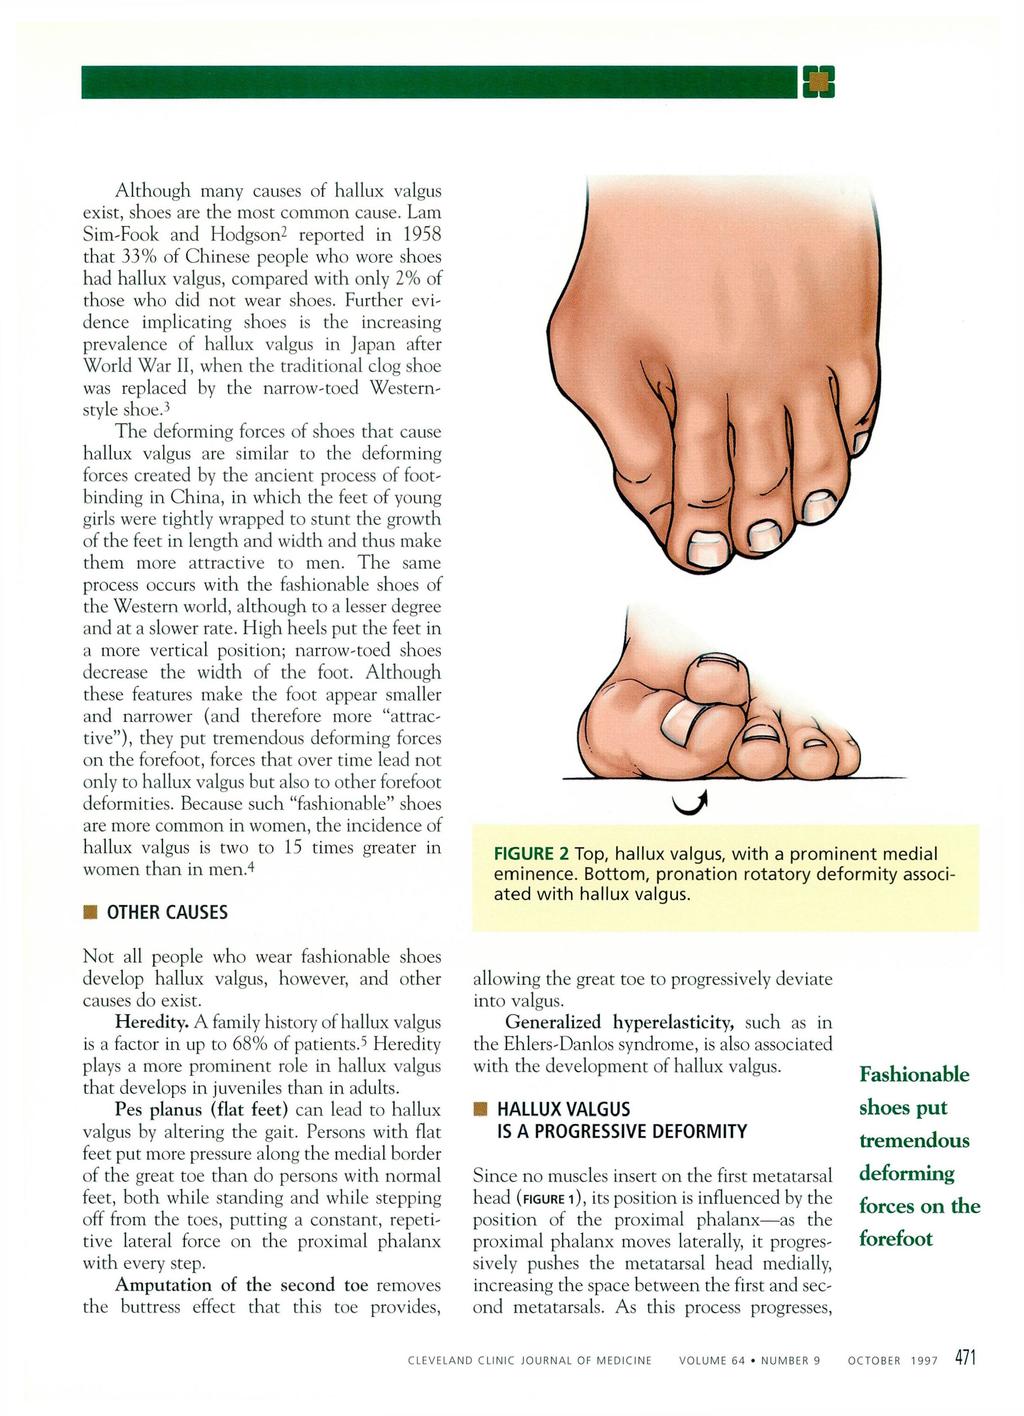 Although many causes of hallux valgus exist, shoes are the most common cause.